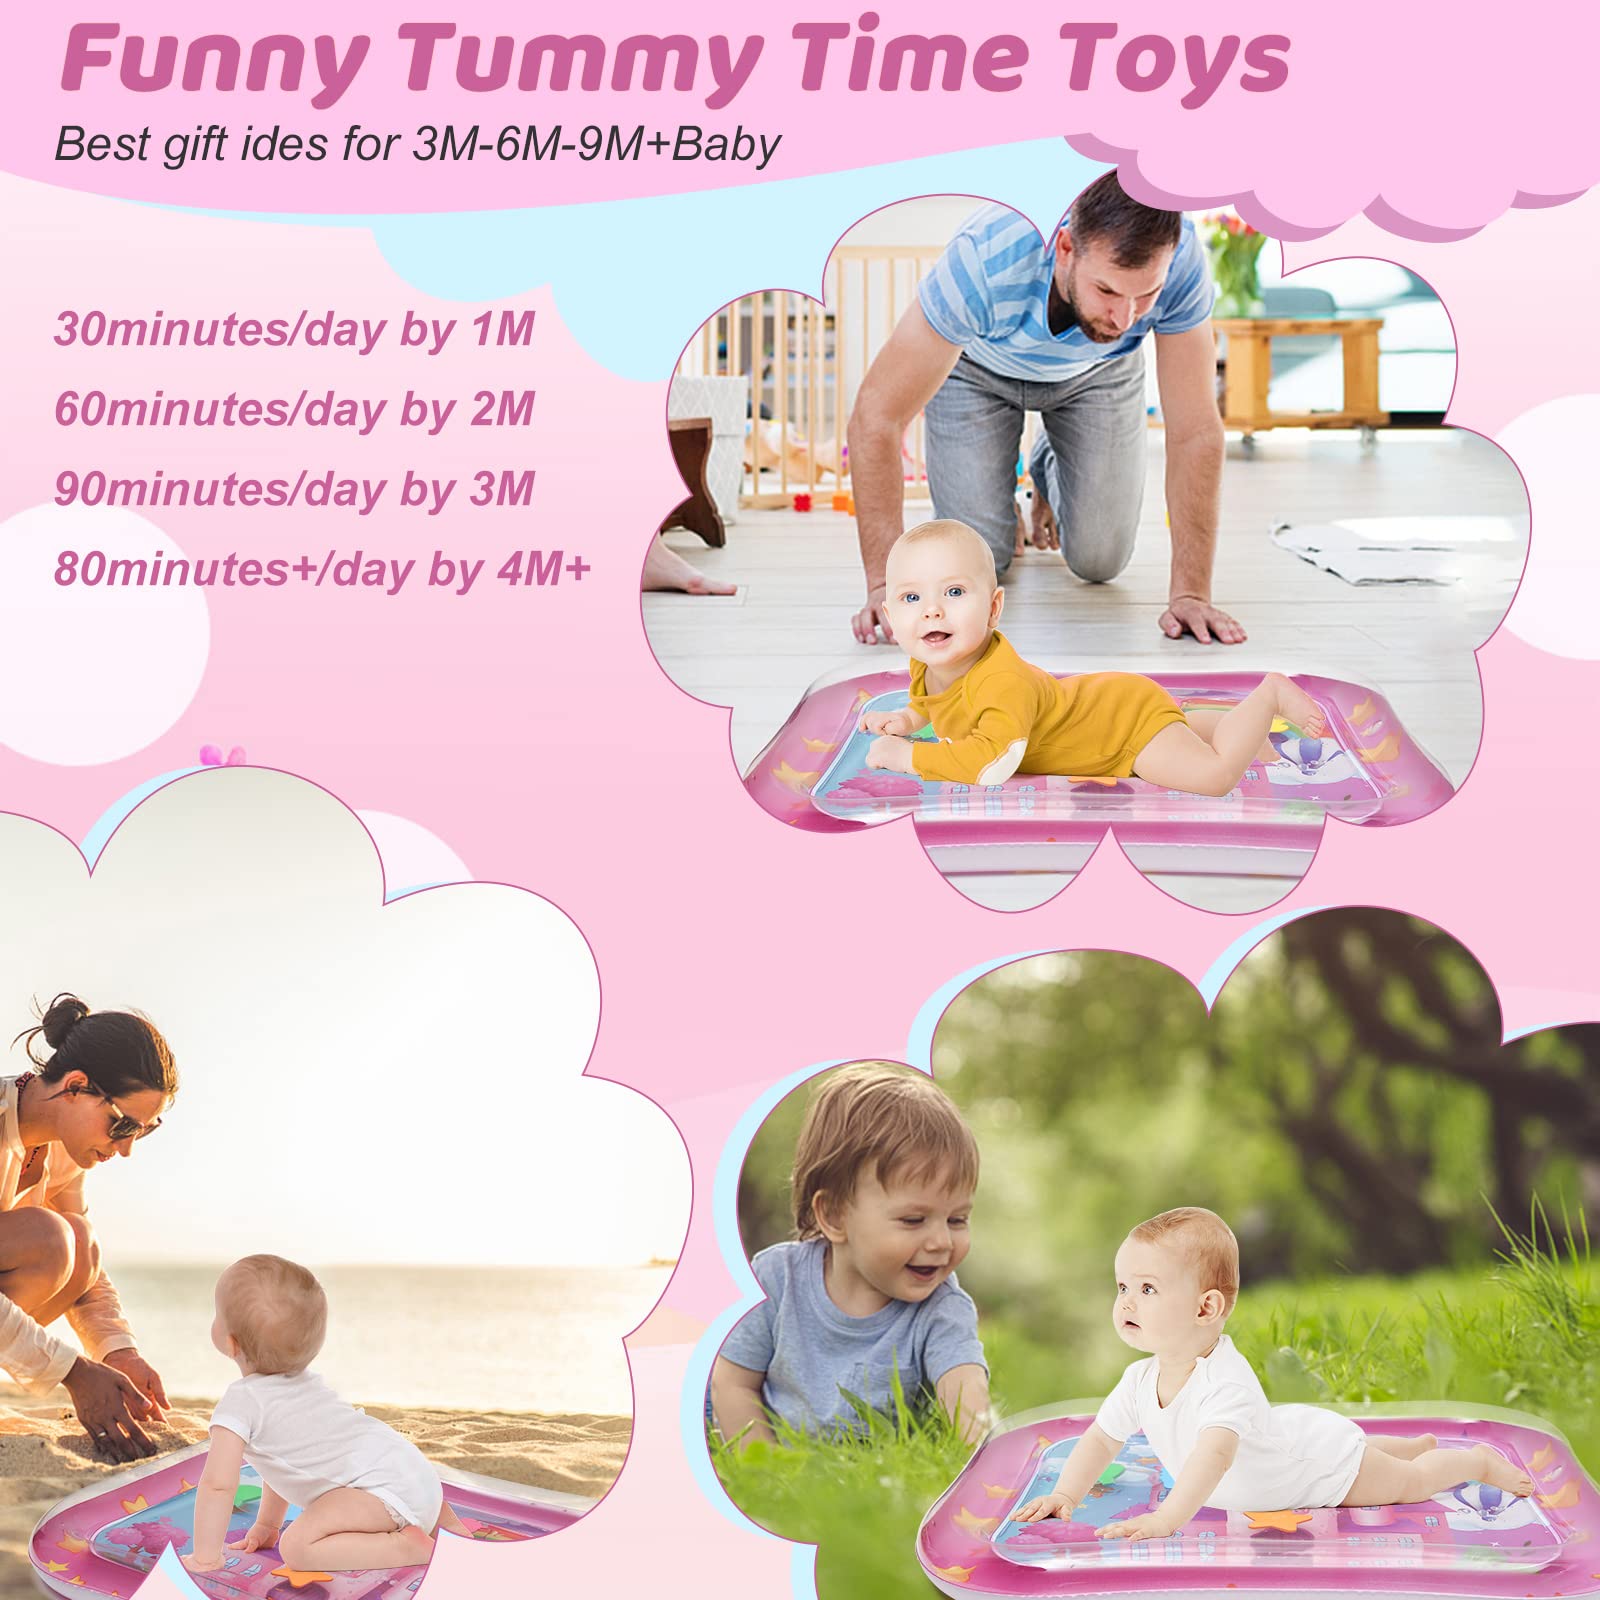 Inflatable Tummy Time Mat, Baby Girl Toys for 3 6 9 Months Infant Sensory Development, Tummy Time Toys for Baby Girl Gifts, Great Gift Idea for Newborns